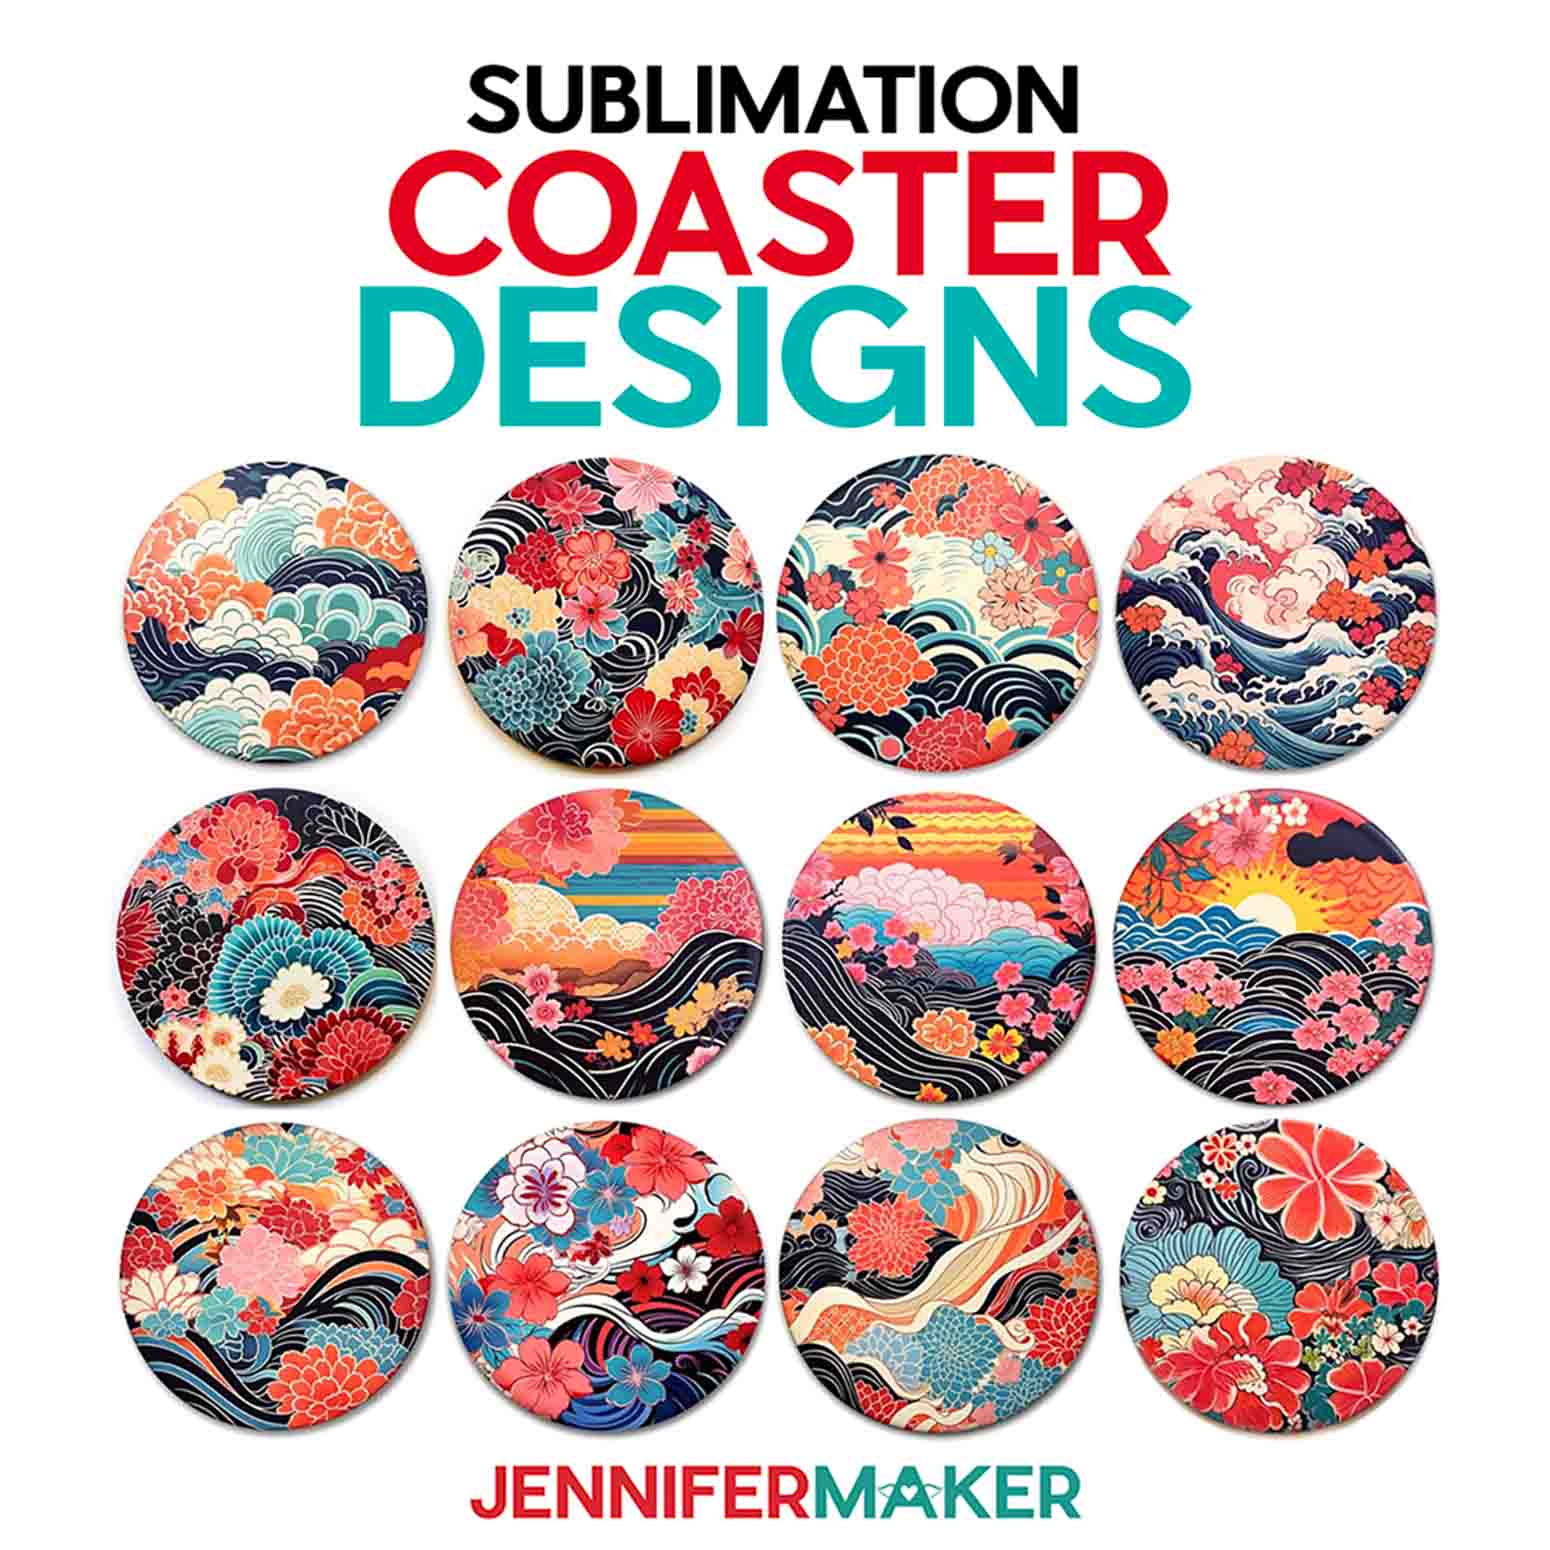 Get new sublimation coaster designs in JenniferMaker's new blog! Grid of 12 round sublimation coasters with bright Japanese art-inspired floral designs.